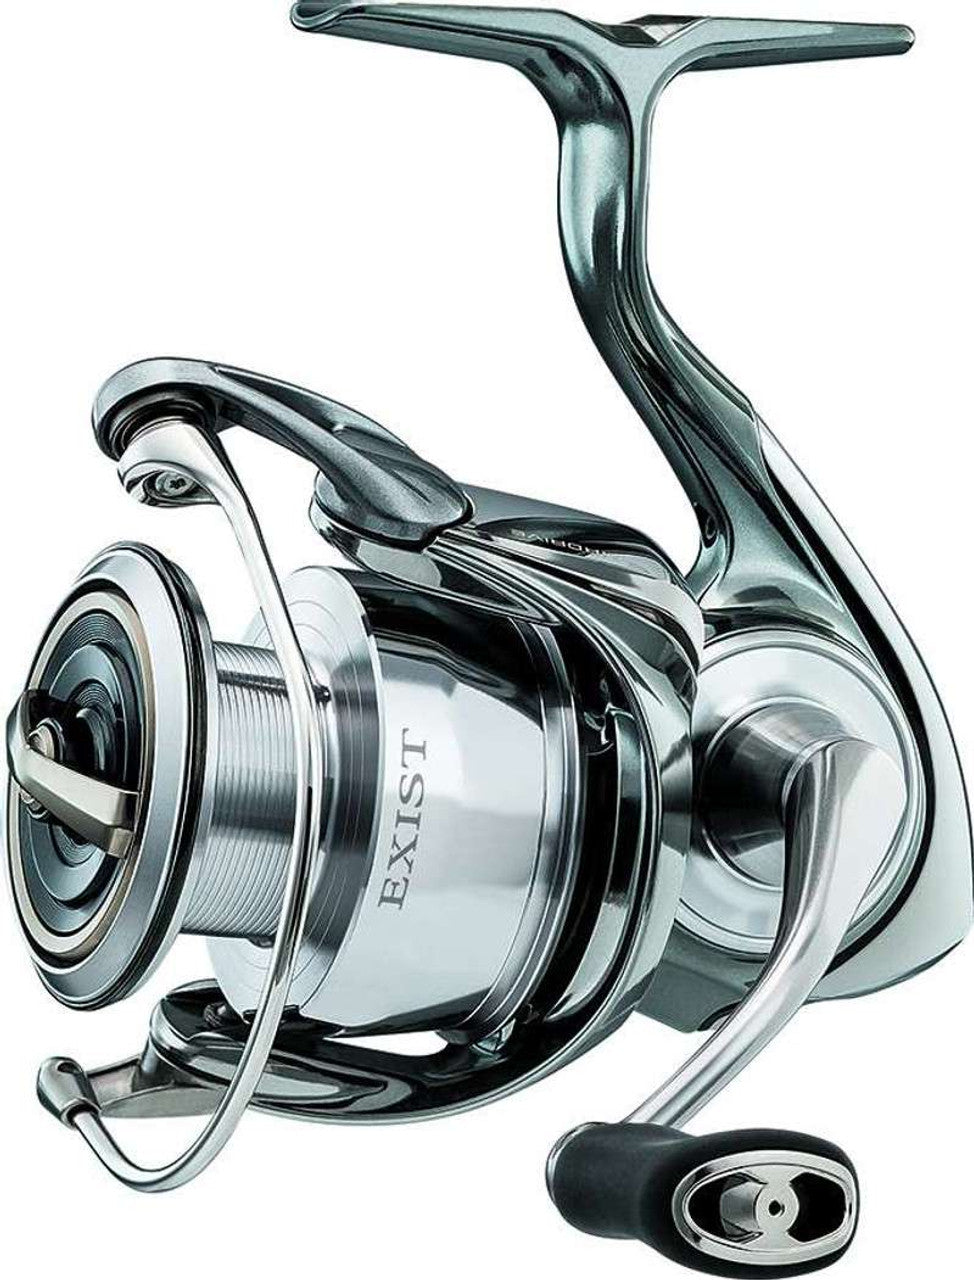 CEMREO 1000 Series Light Game Spining Fishing Reel Carbon Double Handle  Fishing Goods Pesca ATHENA II